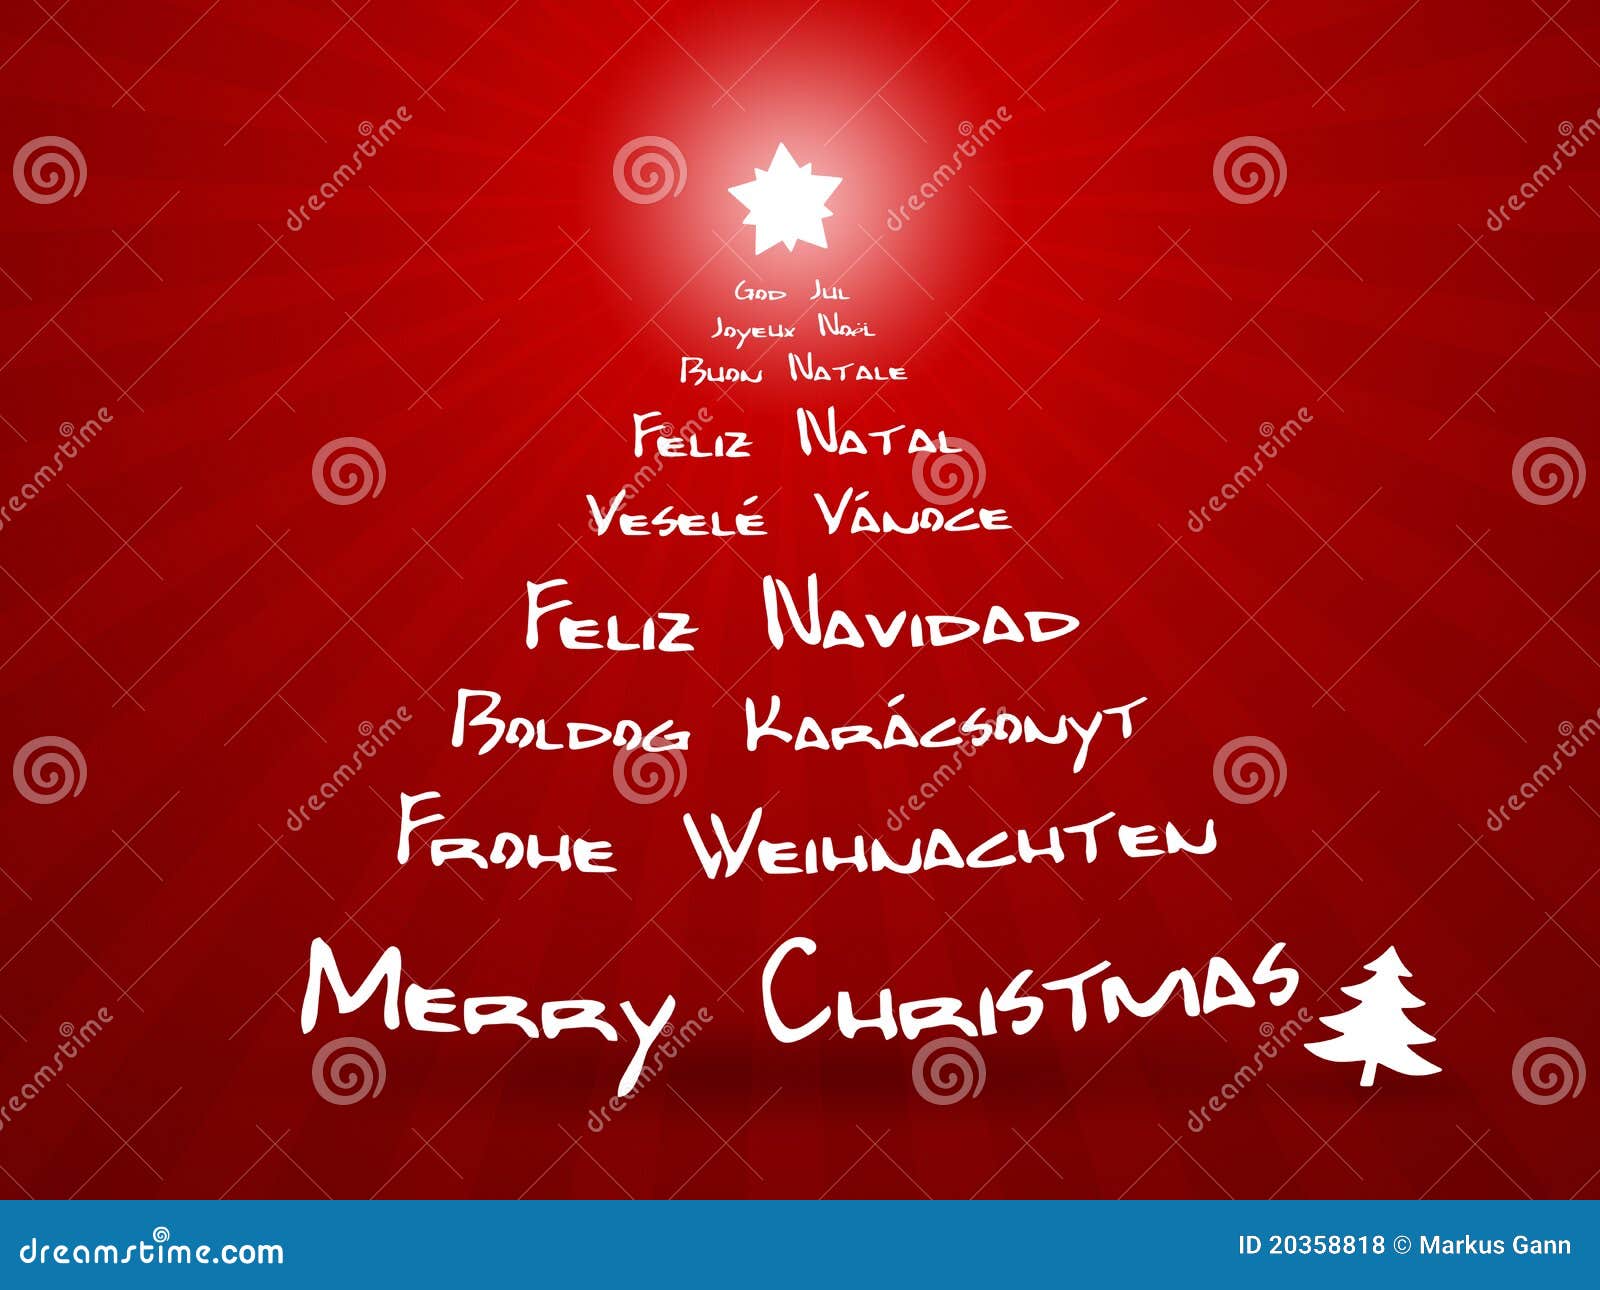 Buon Natale Yard Sign.Merry Christmas In Different Languages Stock Illustration Illustration Of Holiday Merry 20358818